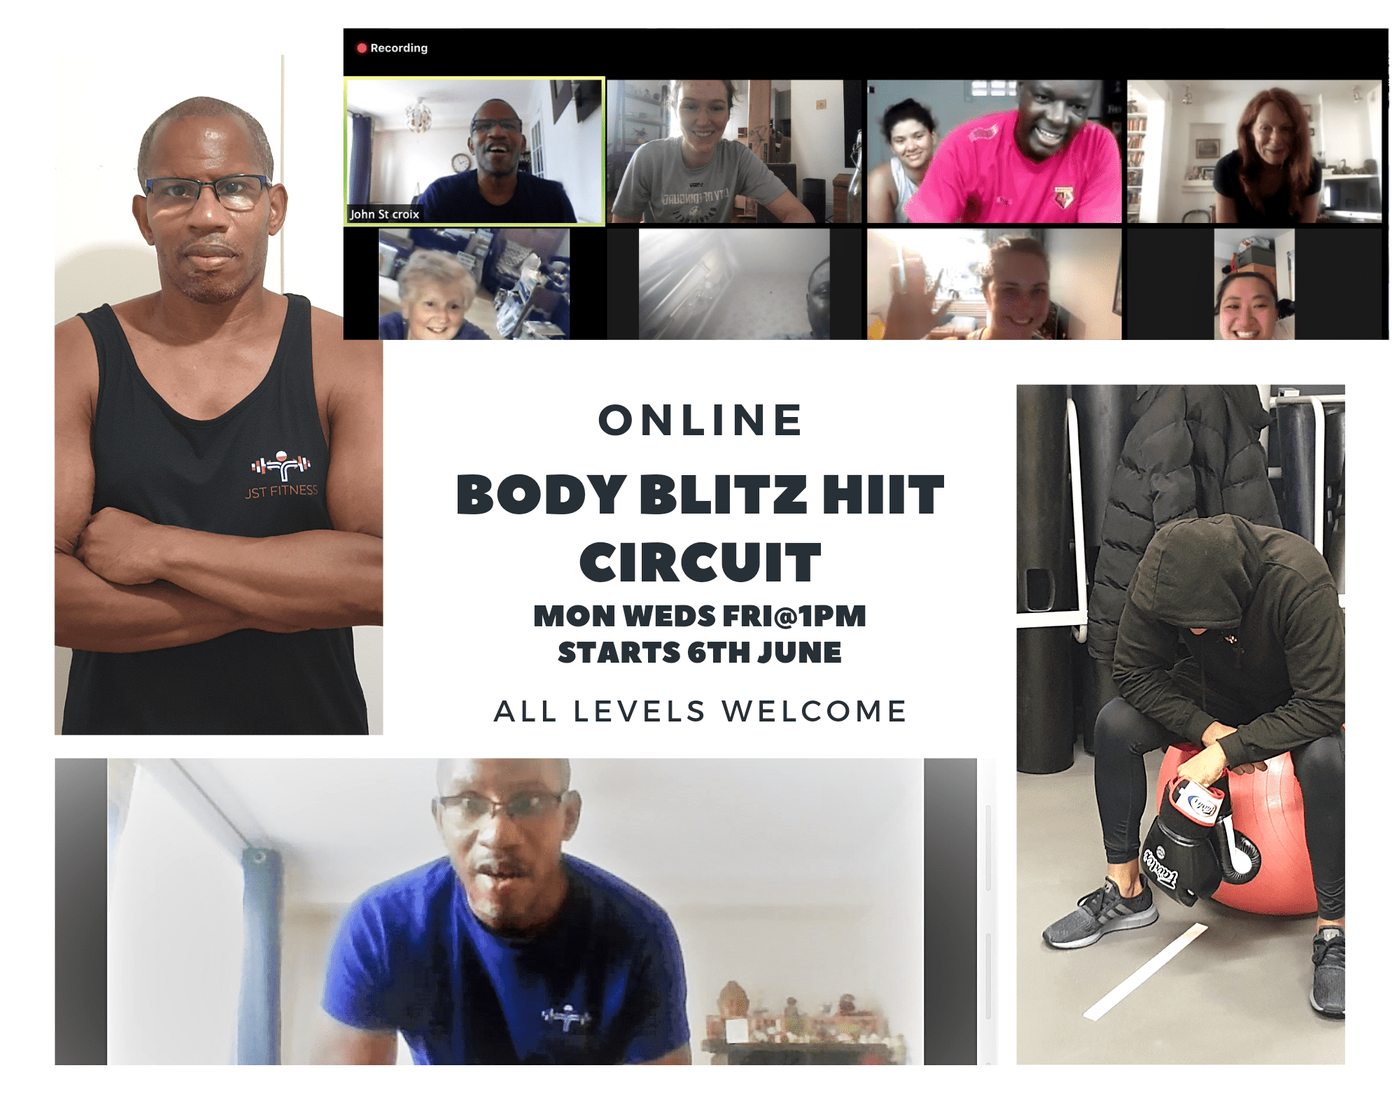 Join me for my new Hiit  lunch time online circuit.
This is an  Online energetic fun whole body workout. It consists on resistance  and body weight  exercise with high intensity exercises in-between, designed to make you sweat.
All levels catered for.
So book in and let's Get done.💪🏾